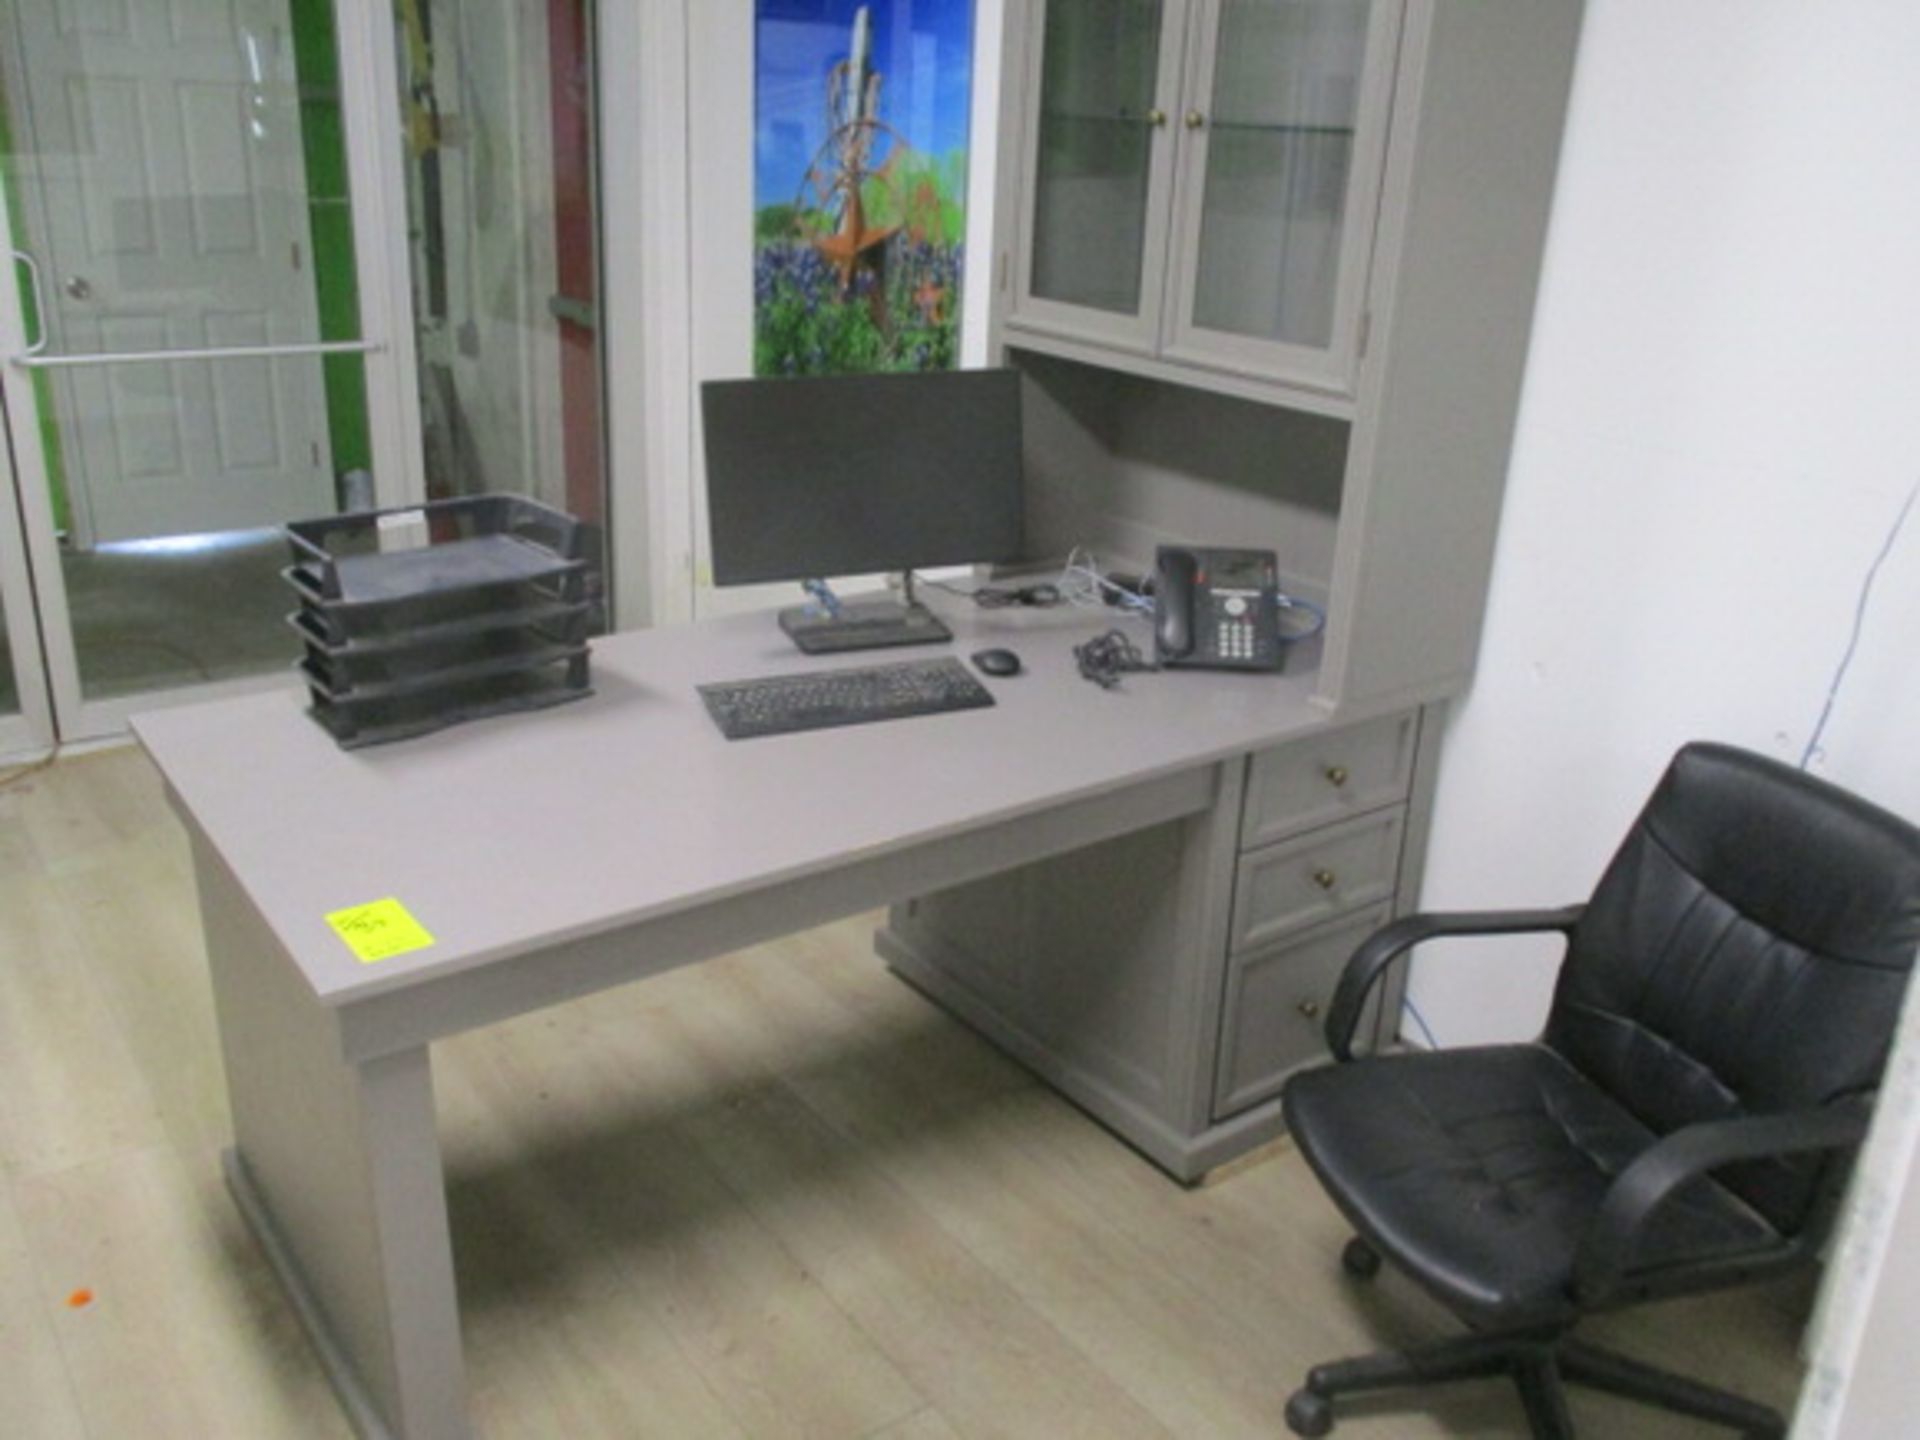 CONT OF OFFICE AS SHOWN - Image 7 of 8